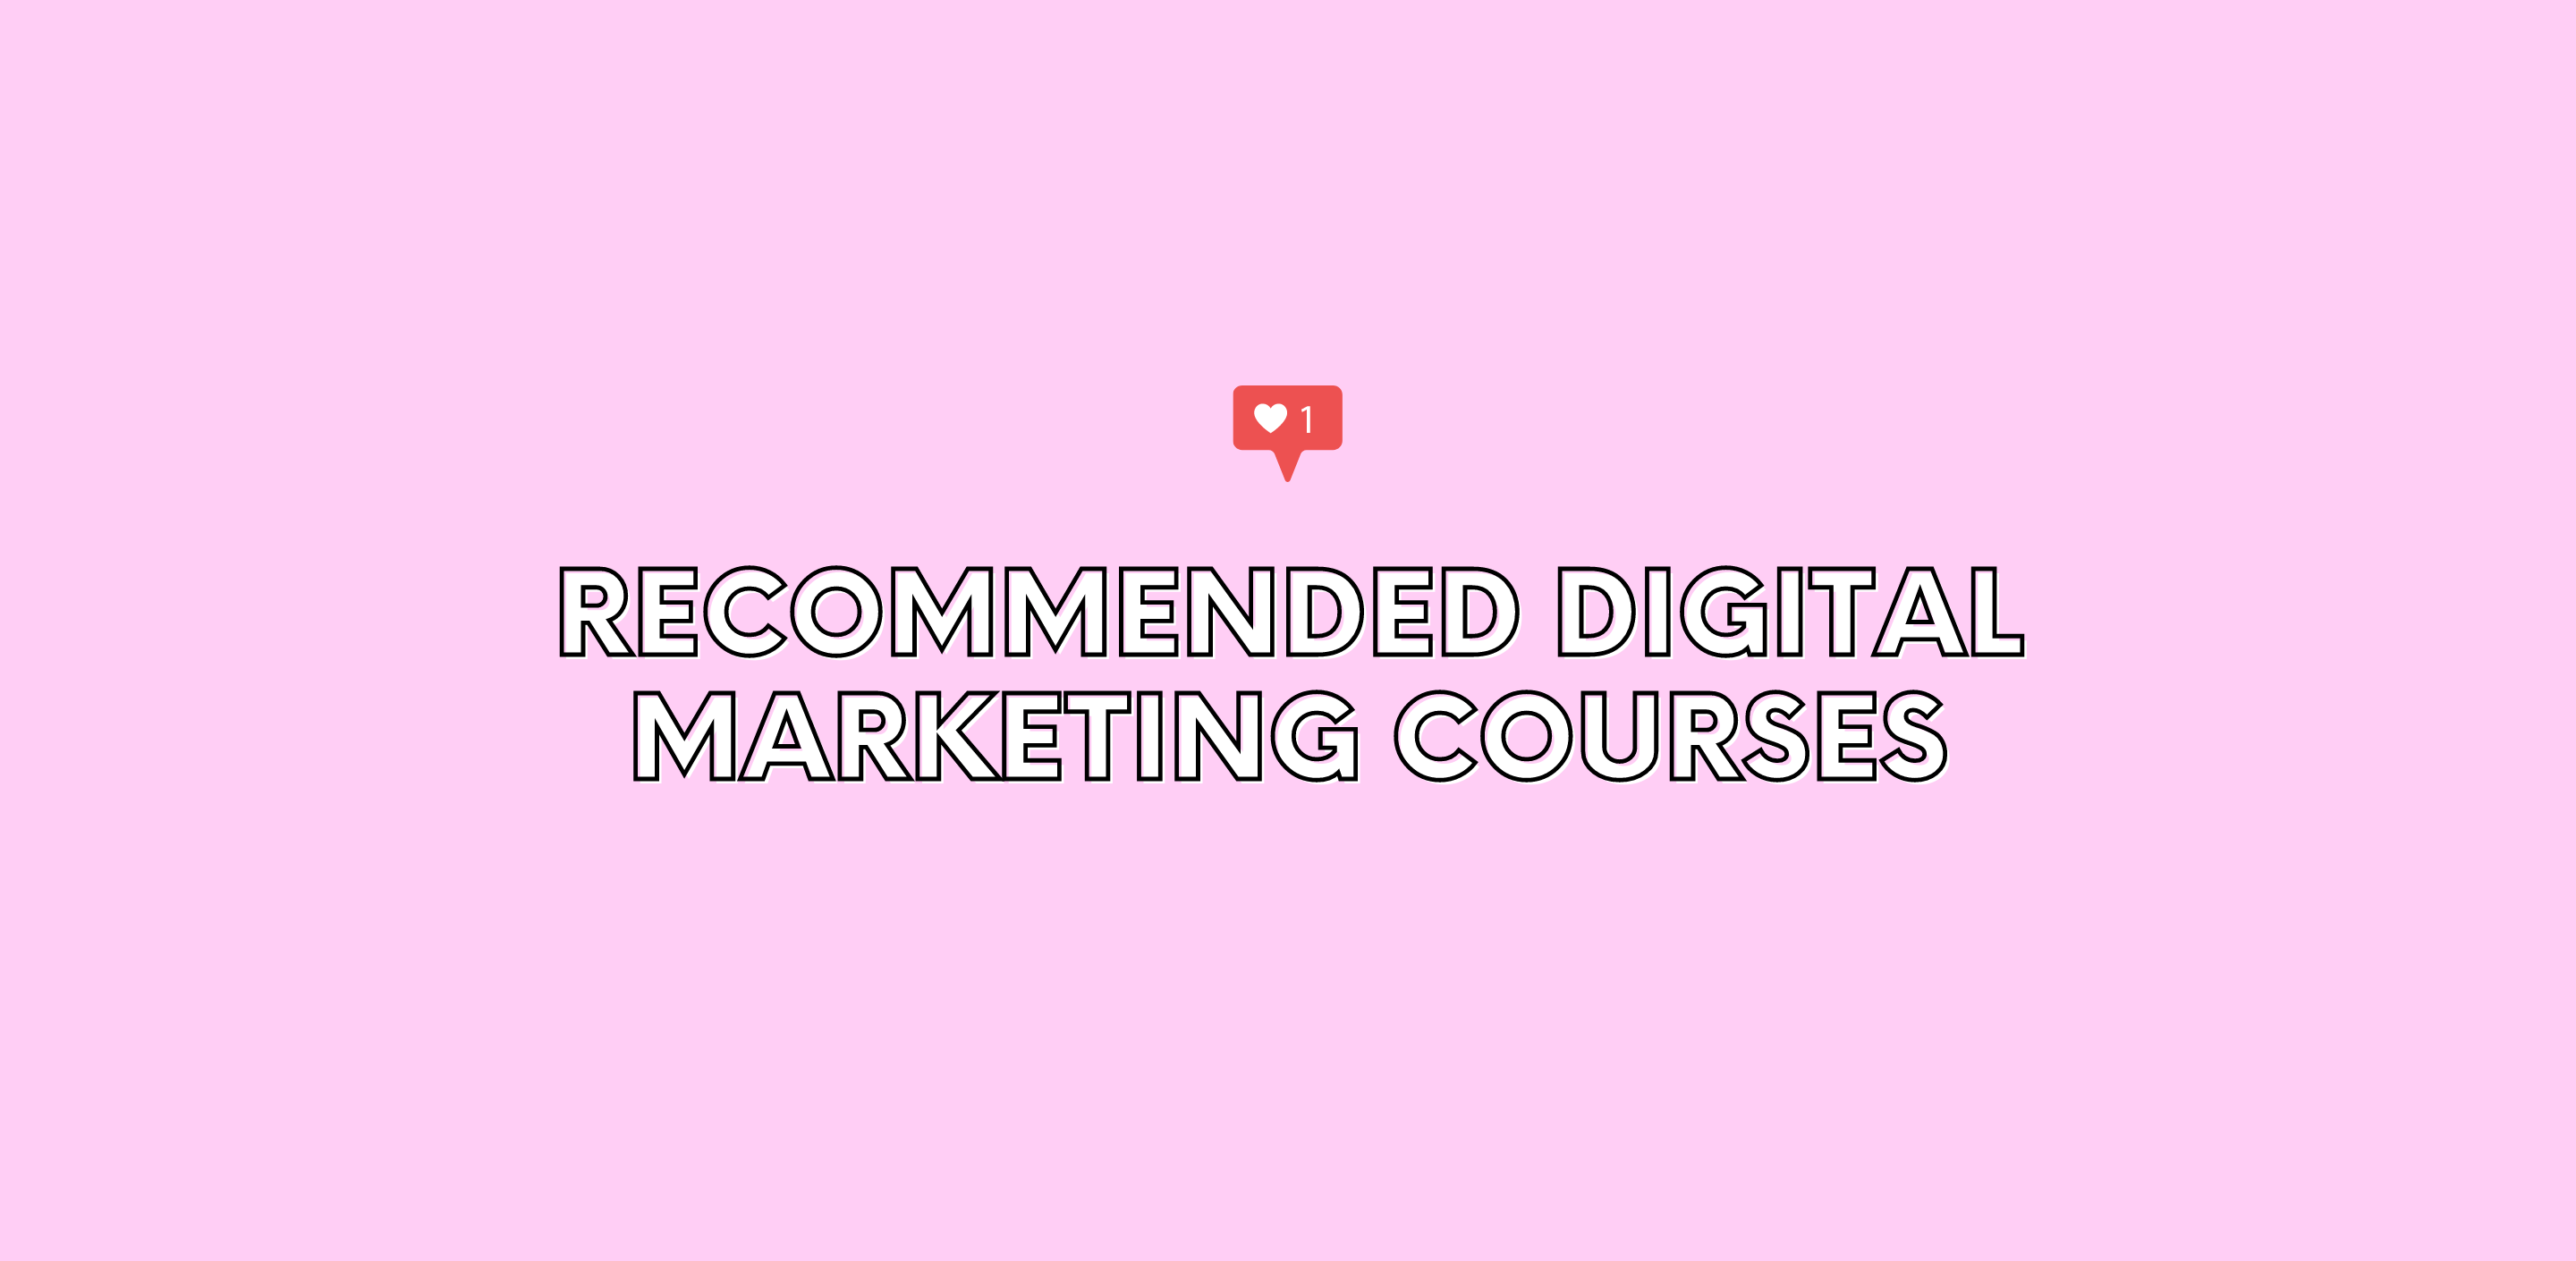 COURSES: Recommended Digital Marketing Courses